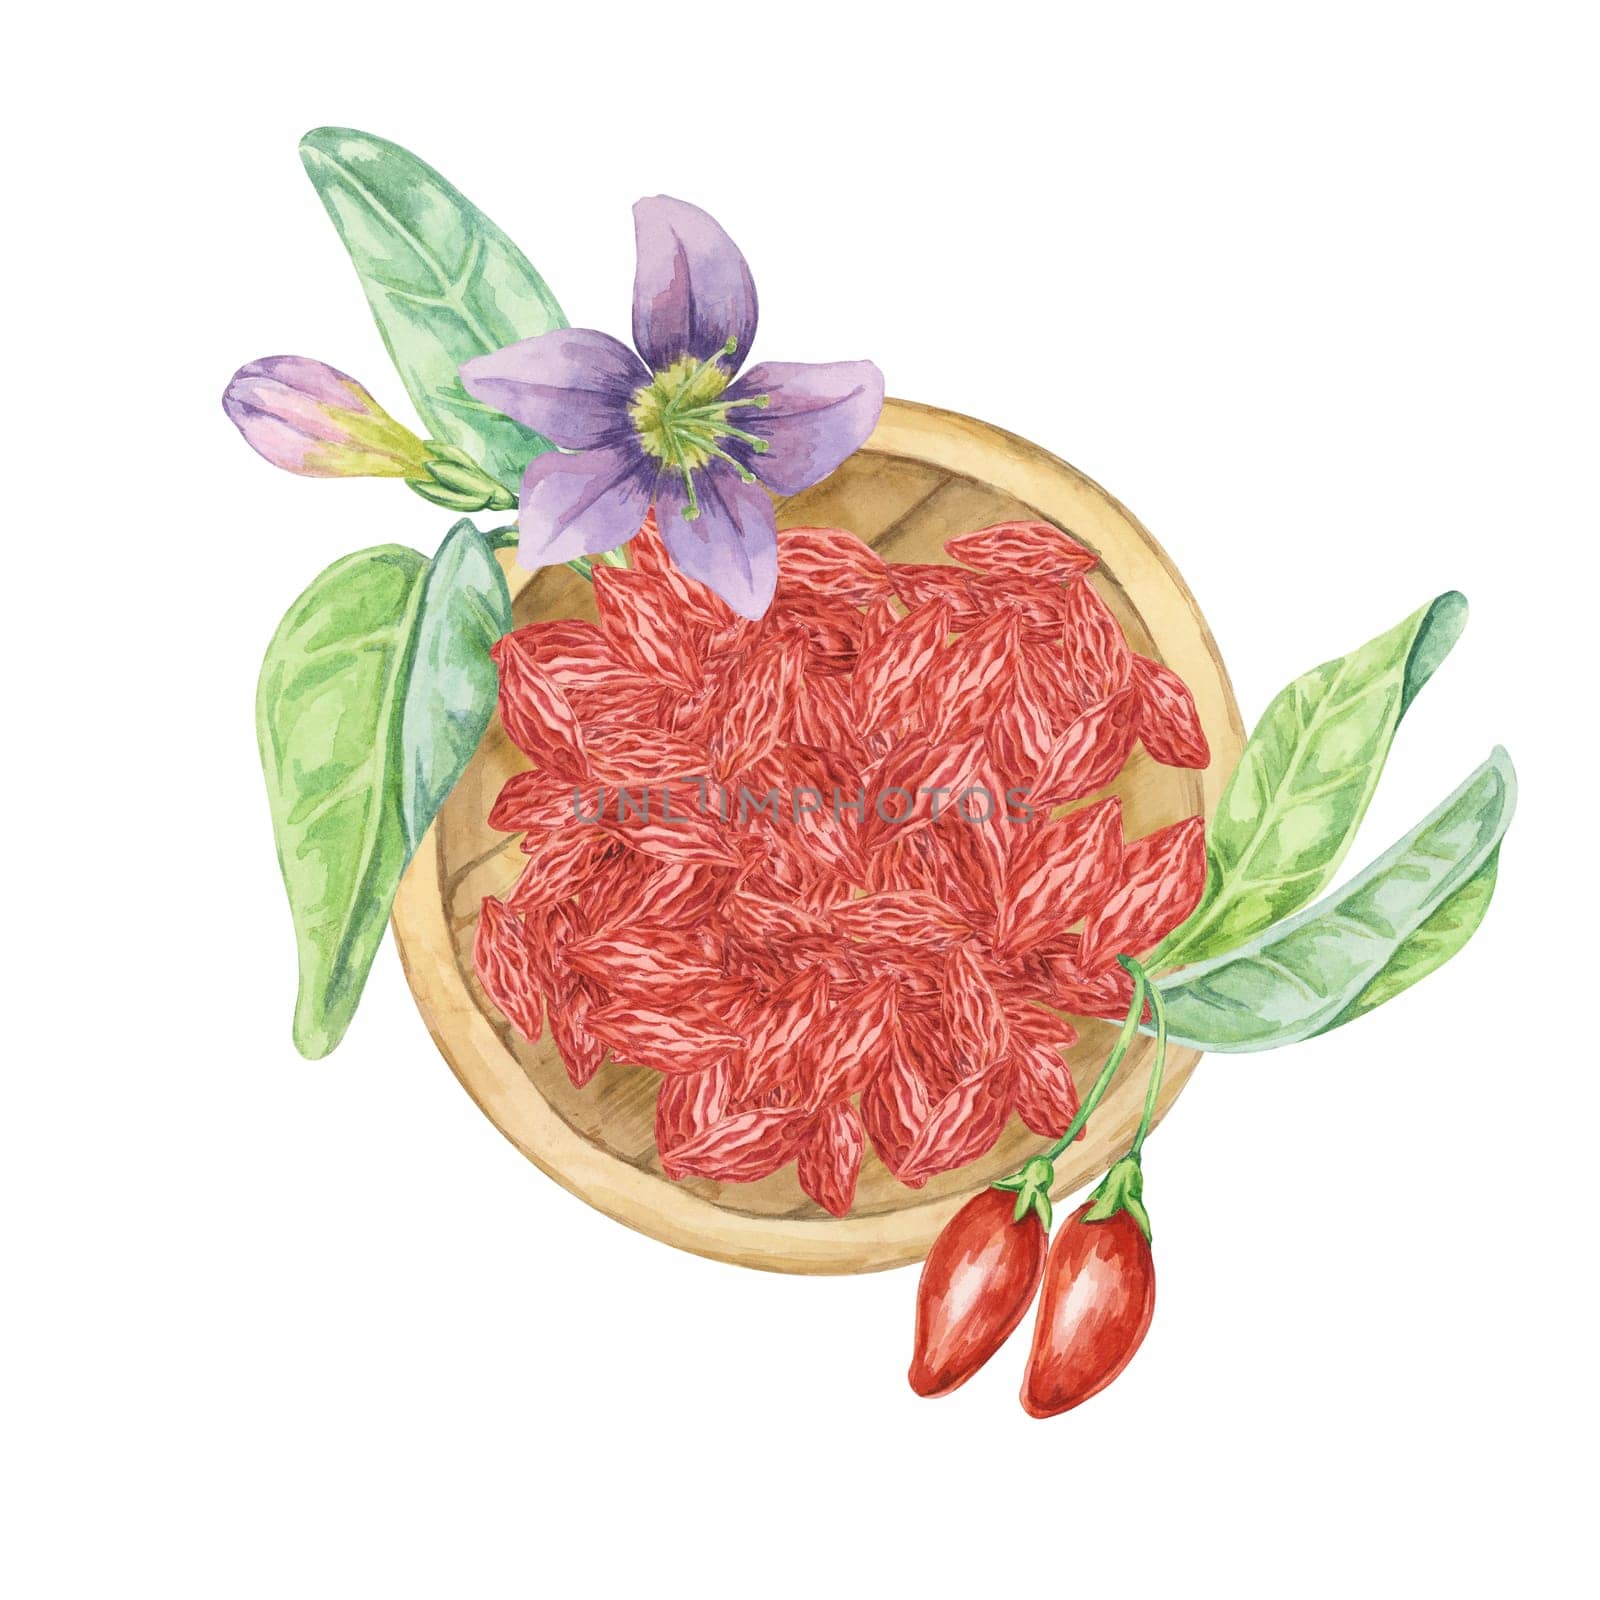 Dry and fresh goji top view in a plate by Fofito